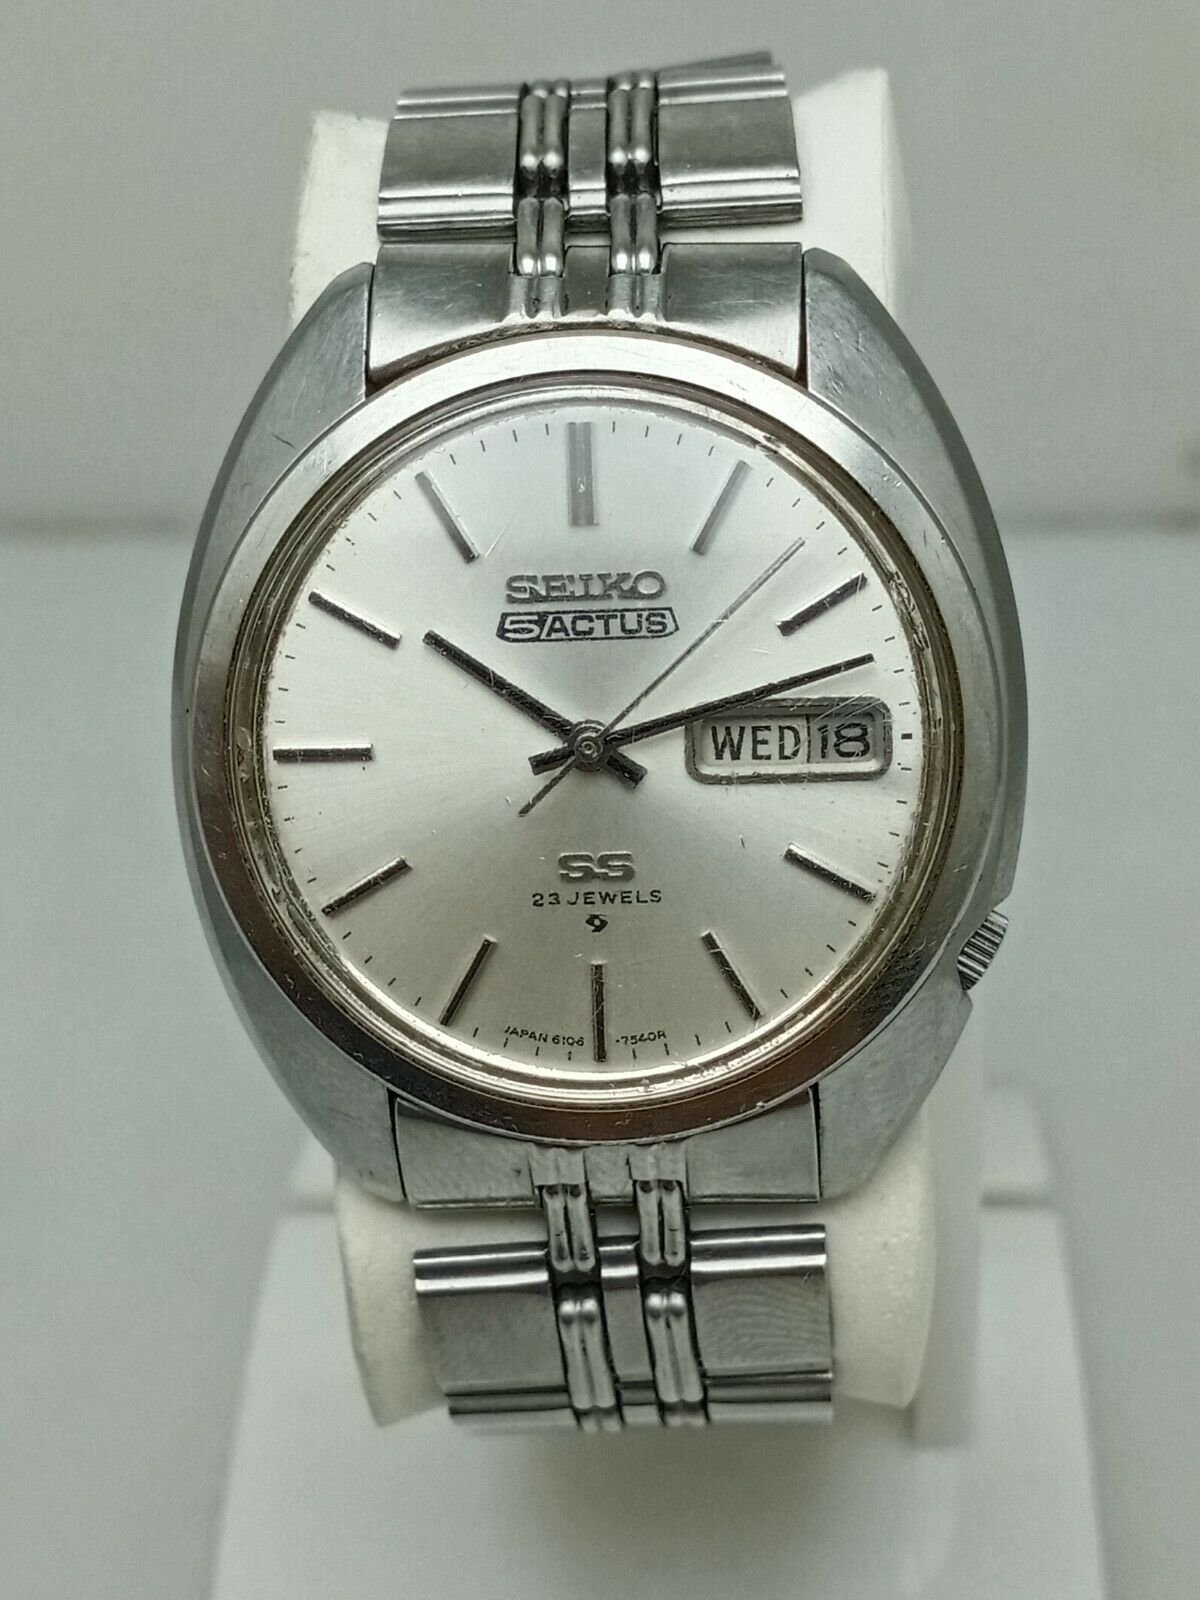 Vintage SEIKO 5 ACTUS SS 23 Jewels 6106-7003 Automatic Watch